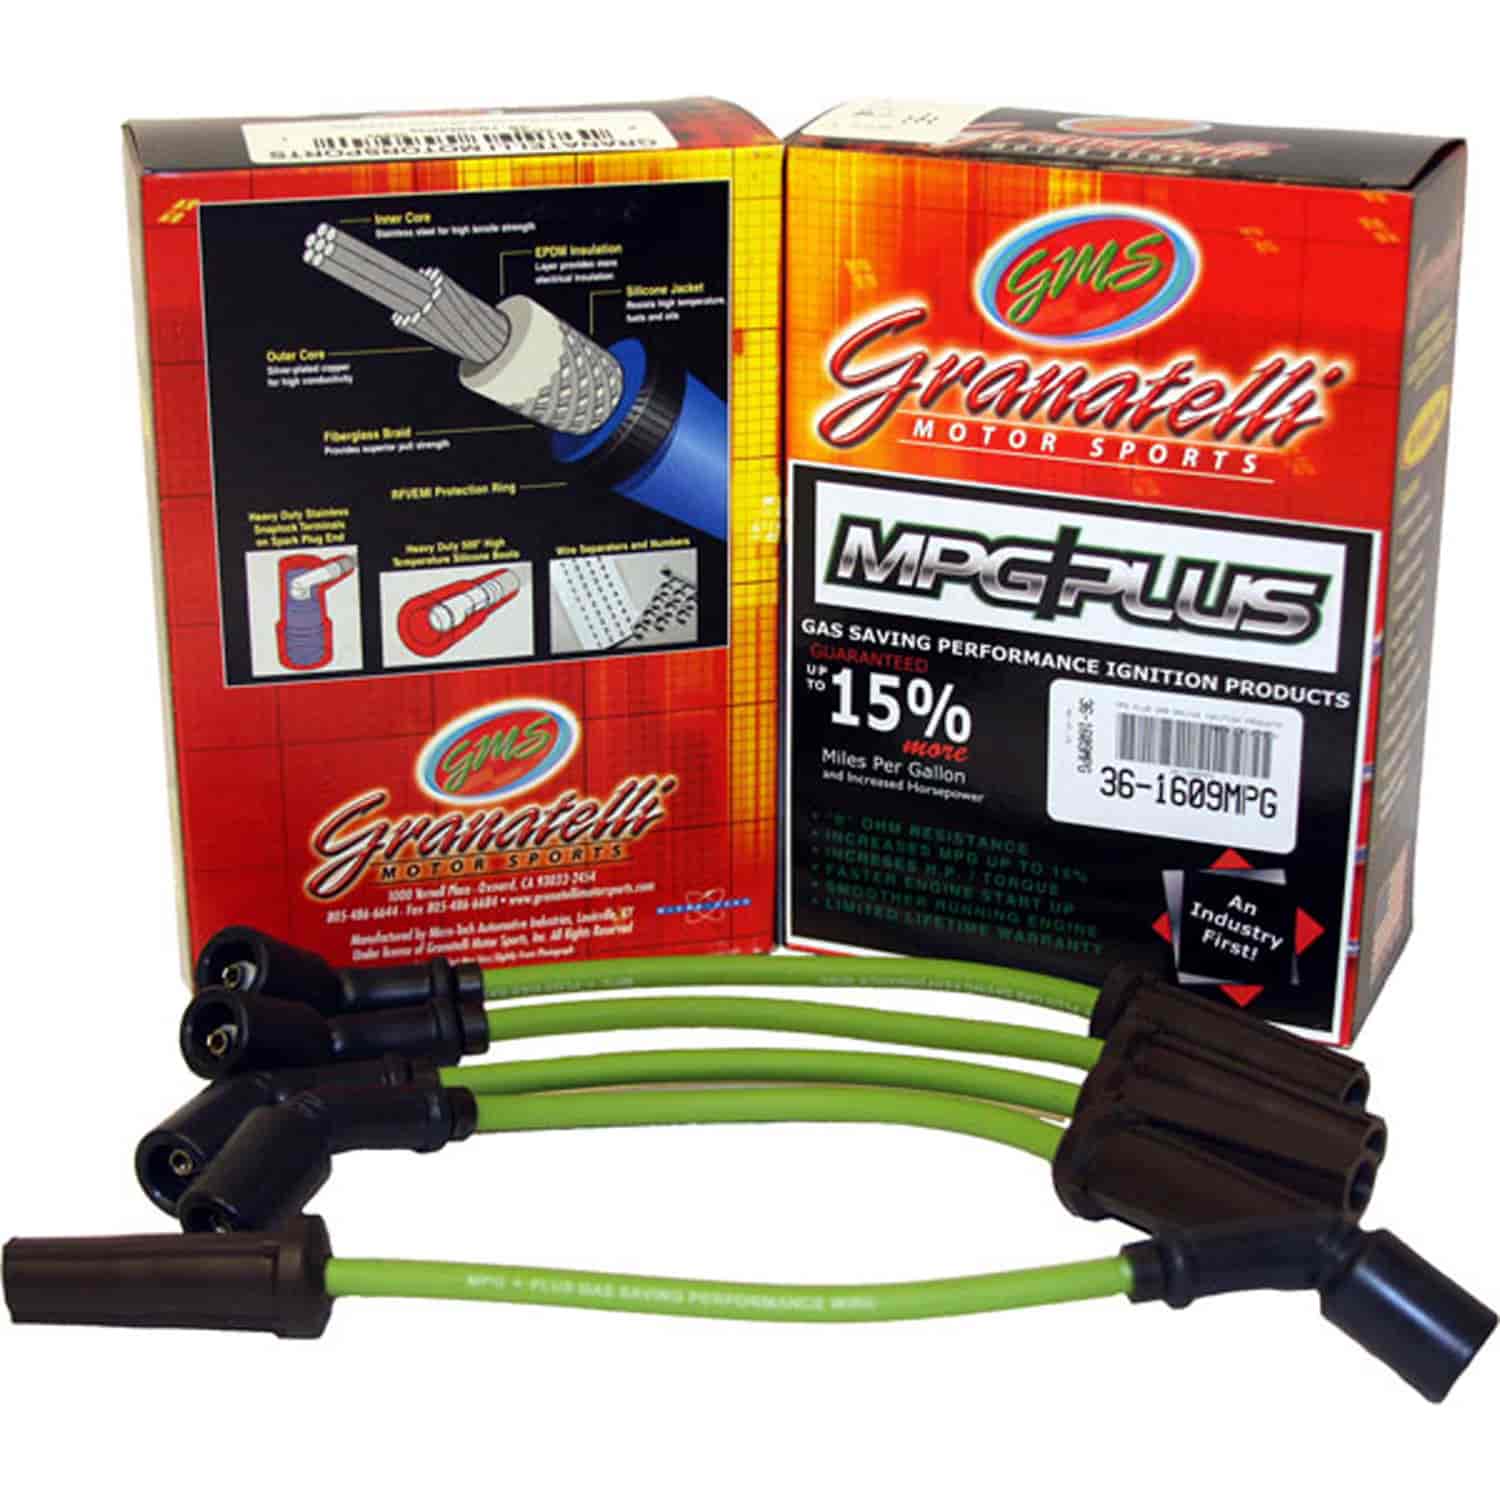 MPG Wires TOYOTA 4 RUNNER 4CYL 2.7L 95-96